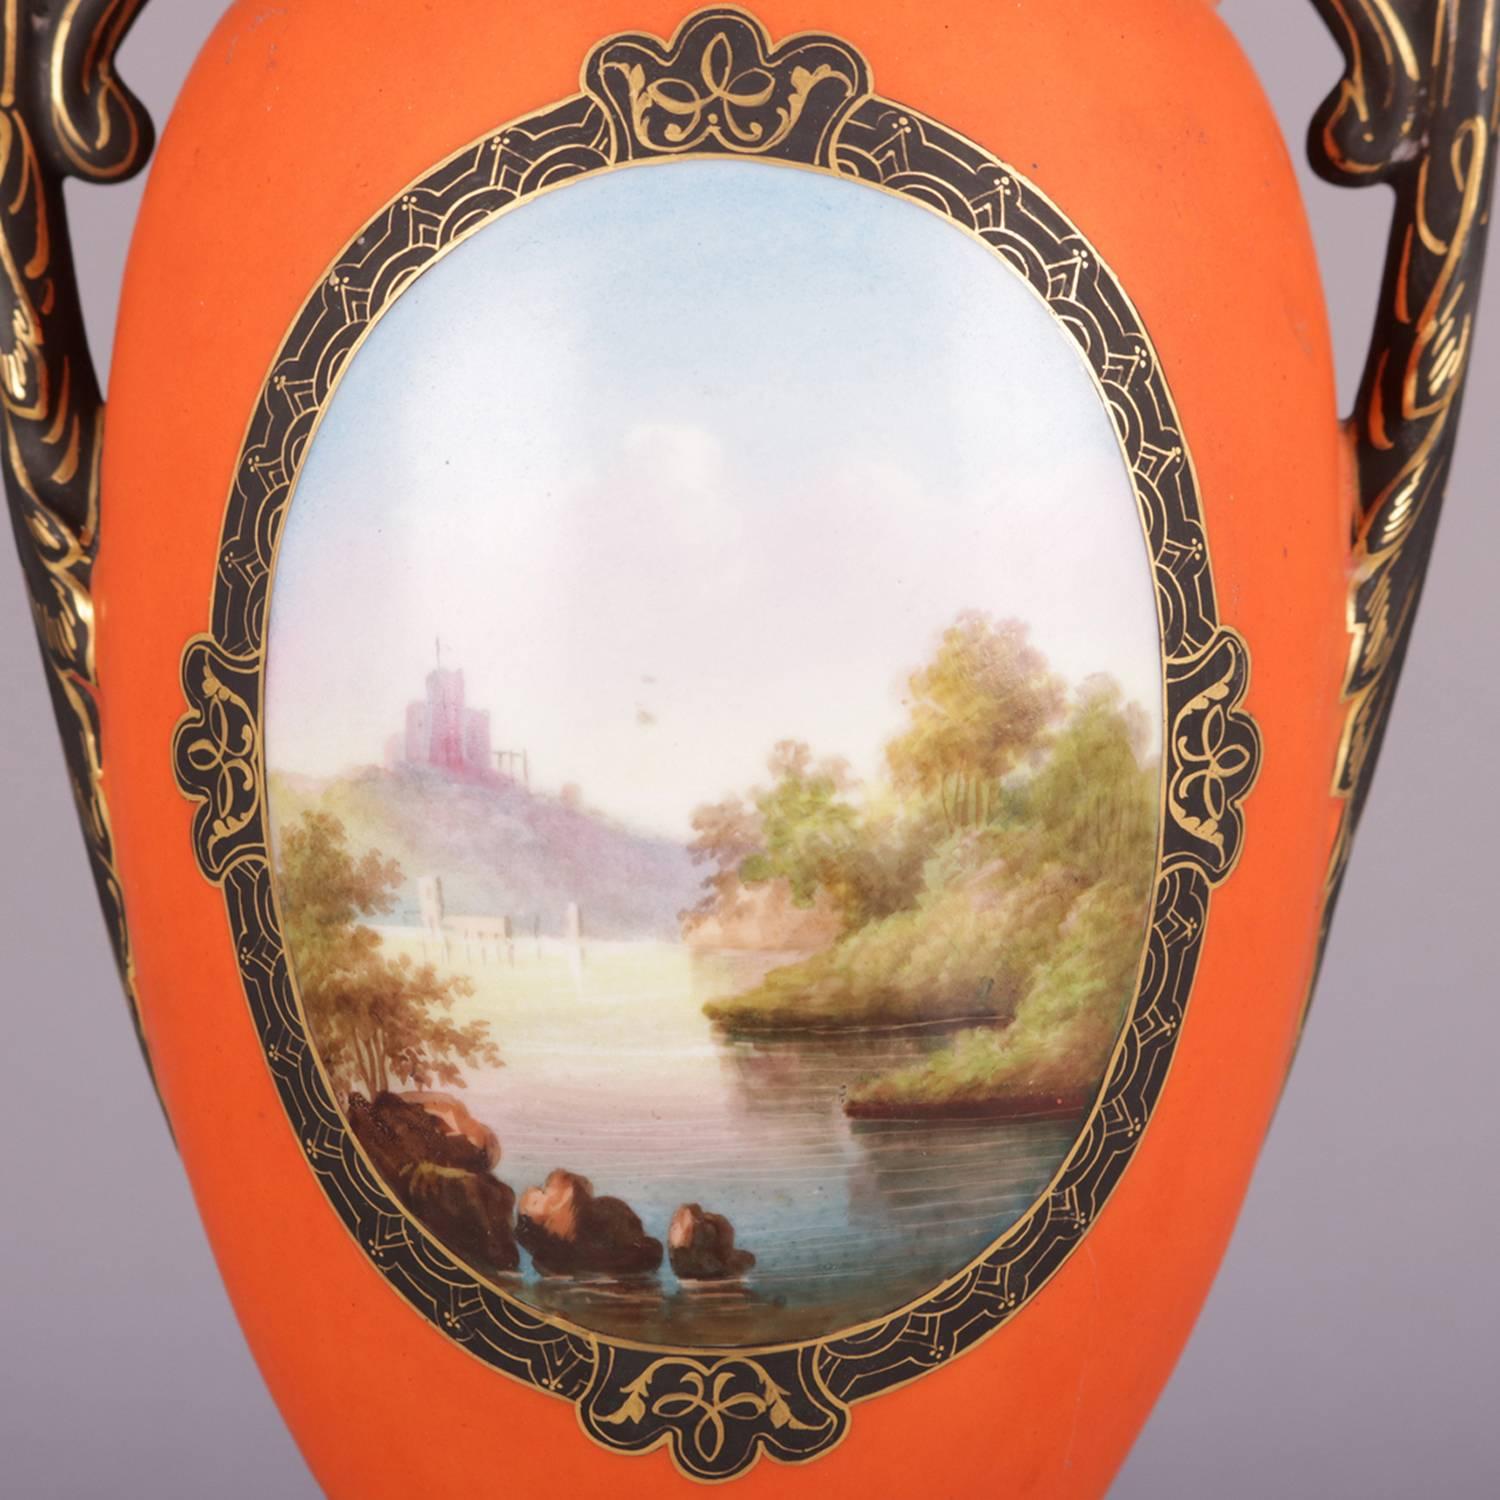 Vintage French Sevres School table lamp features urn form hand-painted and gilt porcelain base with Venetian harbor scene reserve, professionally rewired, 20th century

Measures: 30